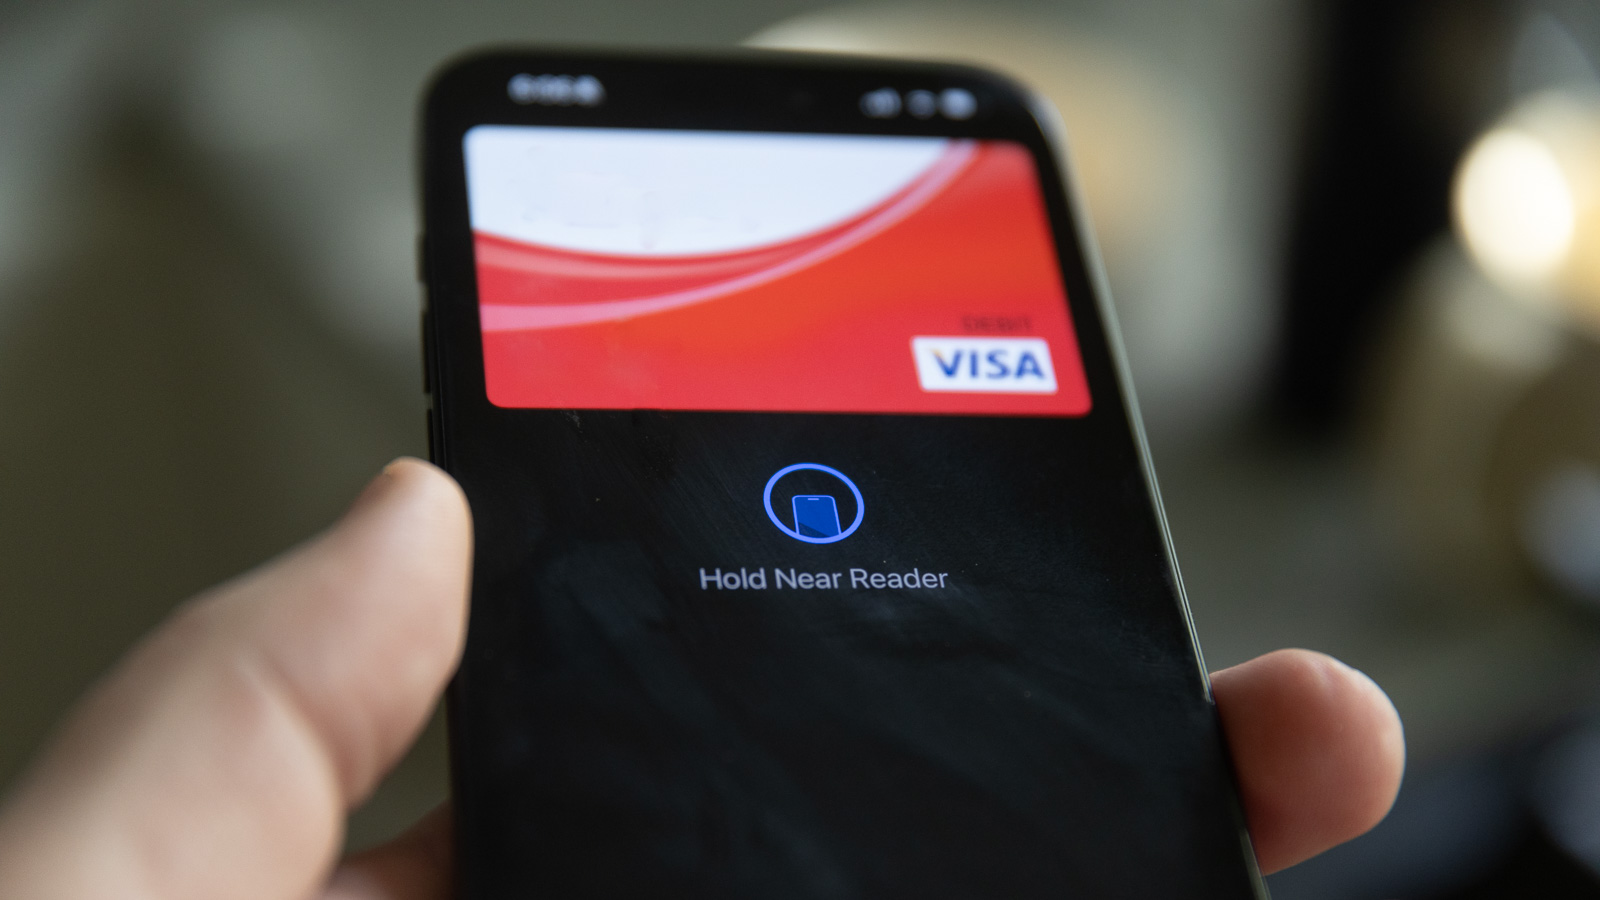 A phone with Apple Pay ready